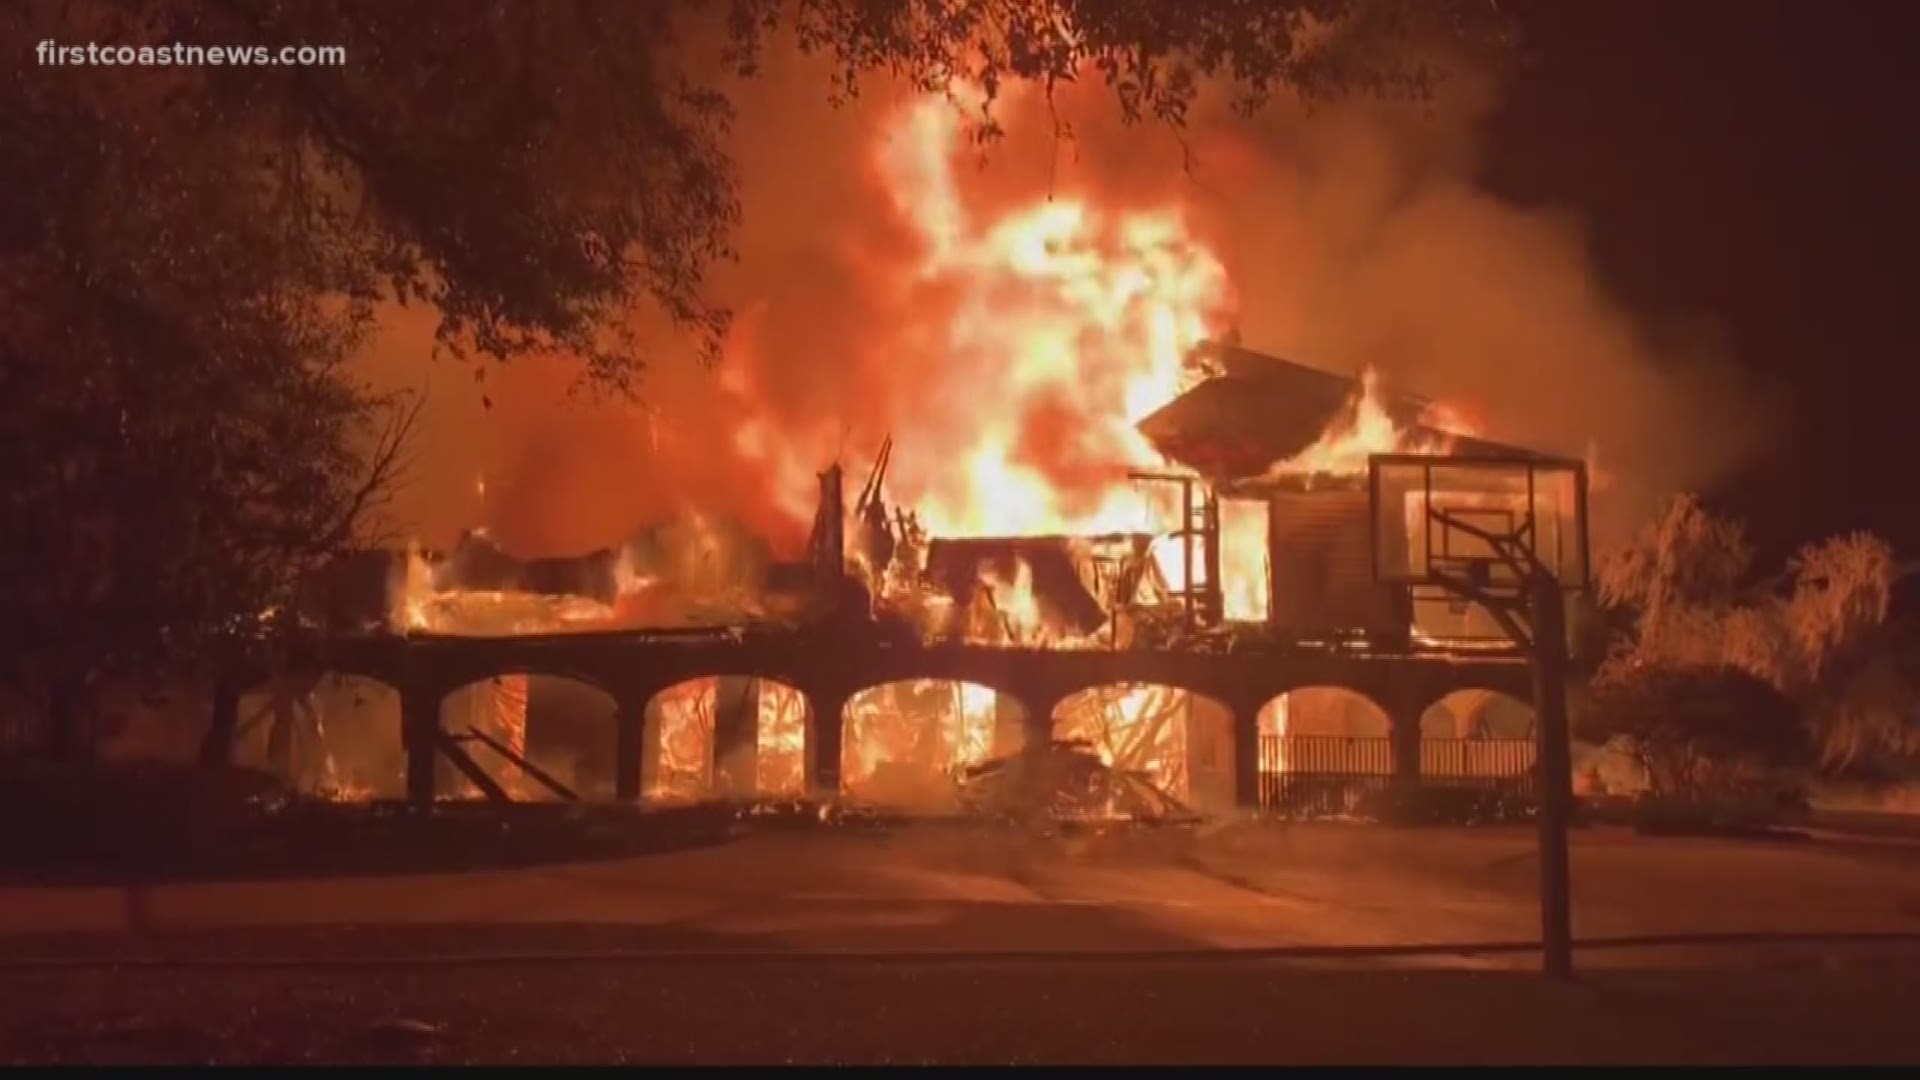 The professional golfer's home on Saint Simon's Island was destroyed by fire early Friday morning.